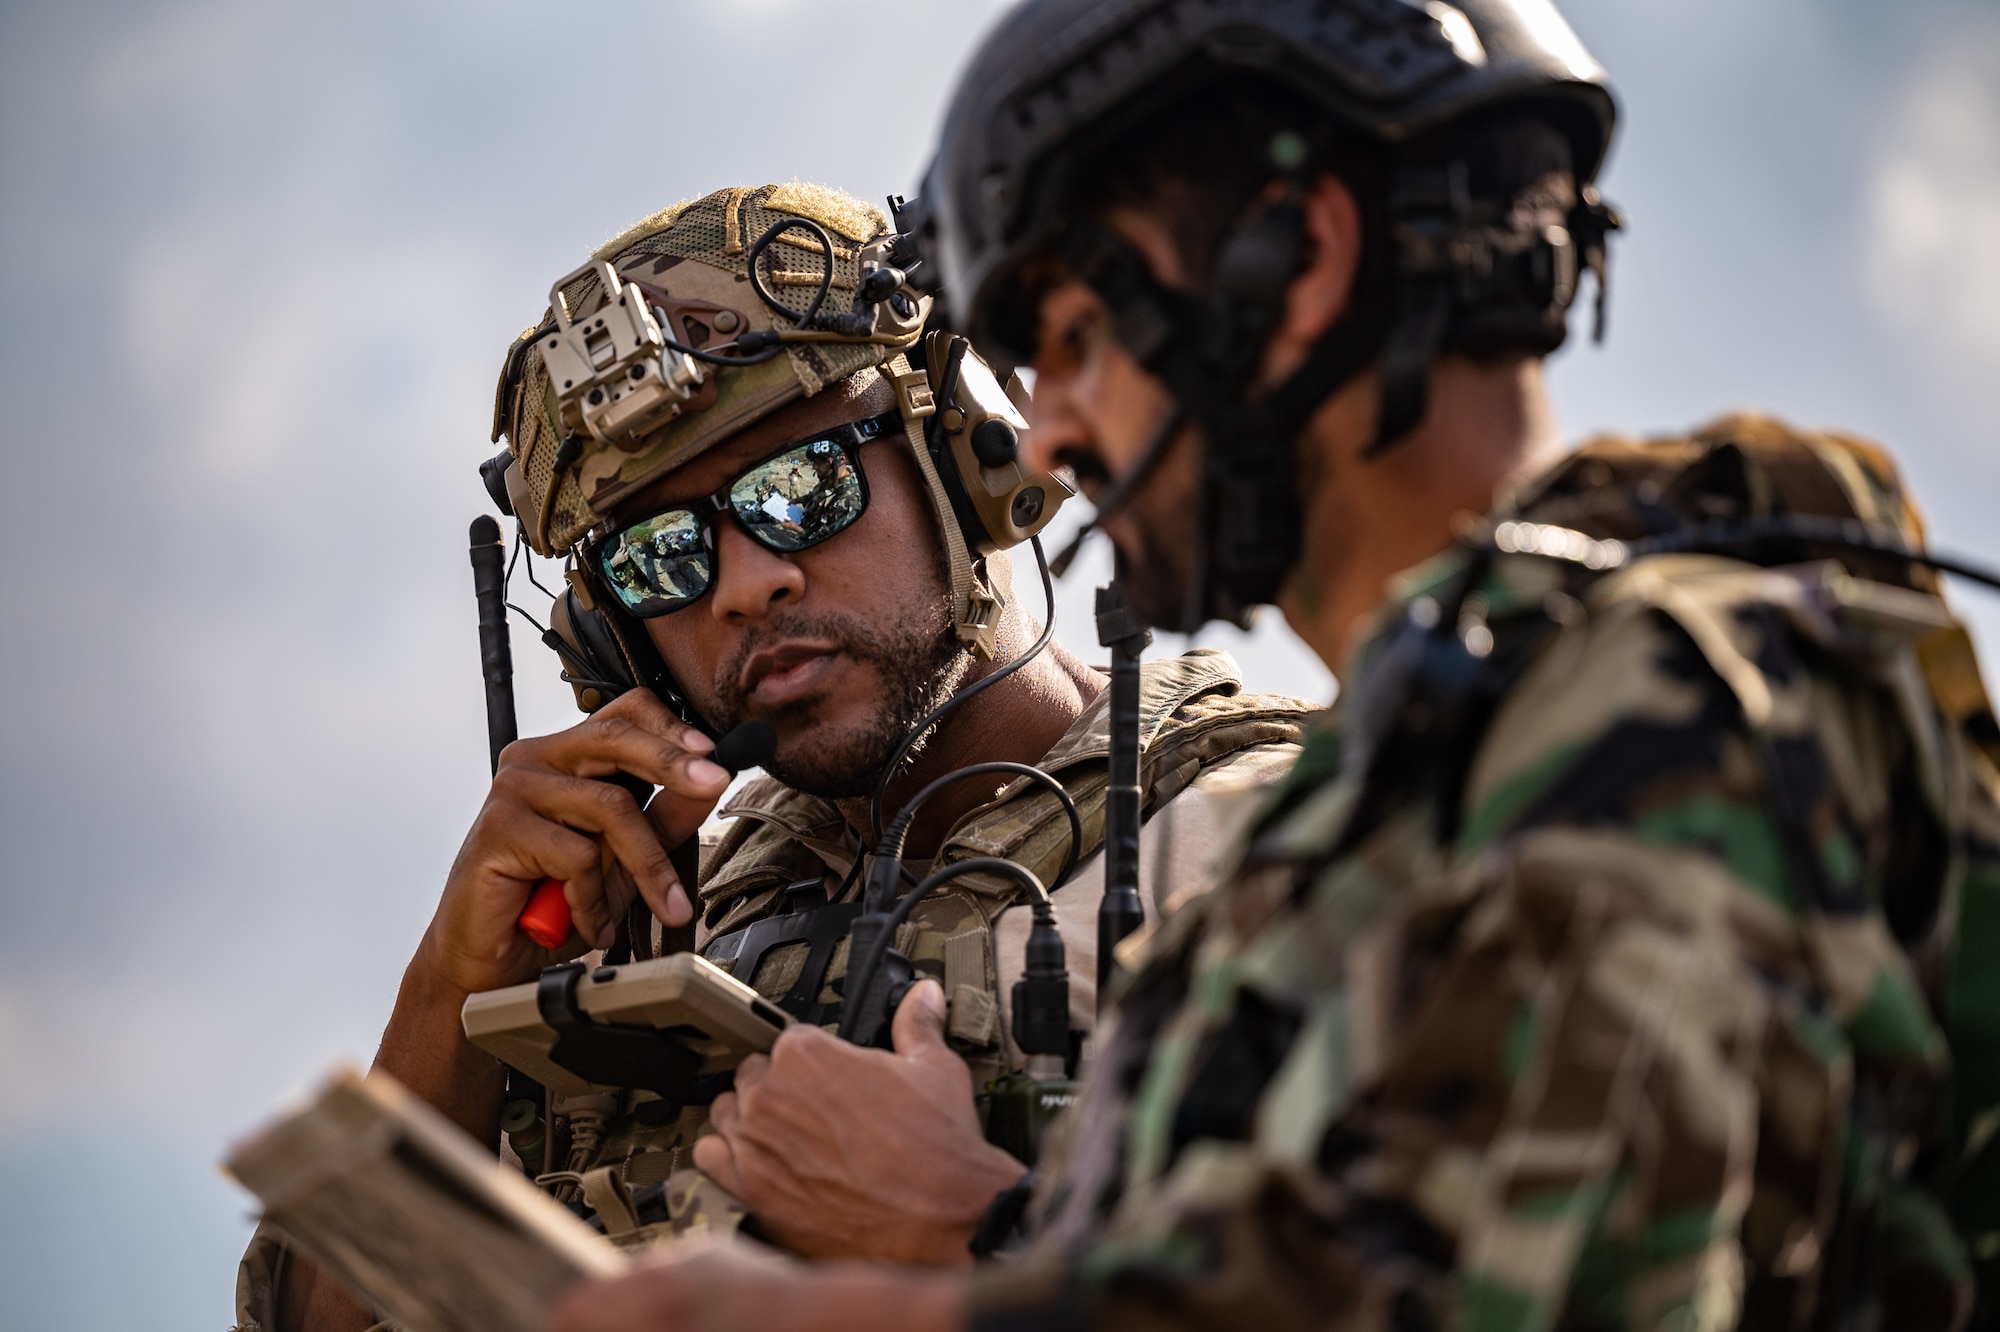 Tech. Sgt. Brandon Tatum, Air Warfare Center chief of joint terminal attack control training, works with Pakistan commandos to locate and coordinate various targets of opportunity during a training scenario at a Pakistan military range, March 1, 2022. The partner nation training conducted was part of Falcon Talon 2022, an Agile Combat Employment operation and the first bilateral training event between the U.S. and Pakistan since 2019. (U.S. Air Force photo by Master Sgt. Christopher Parr)